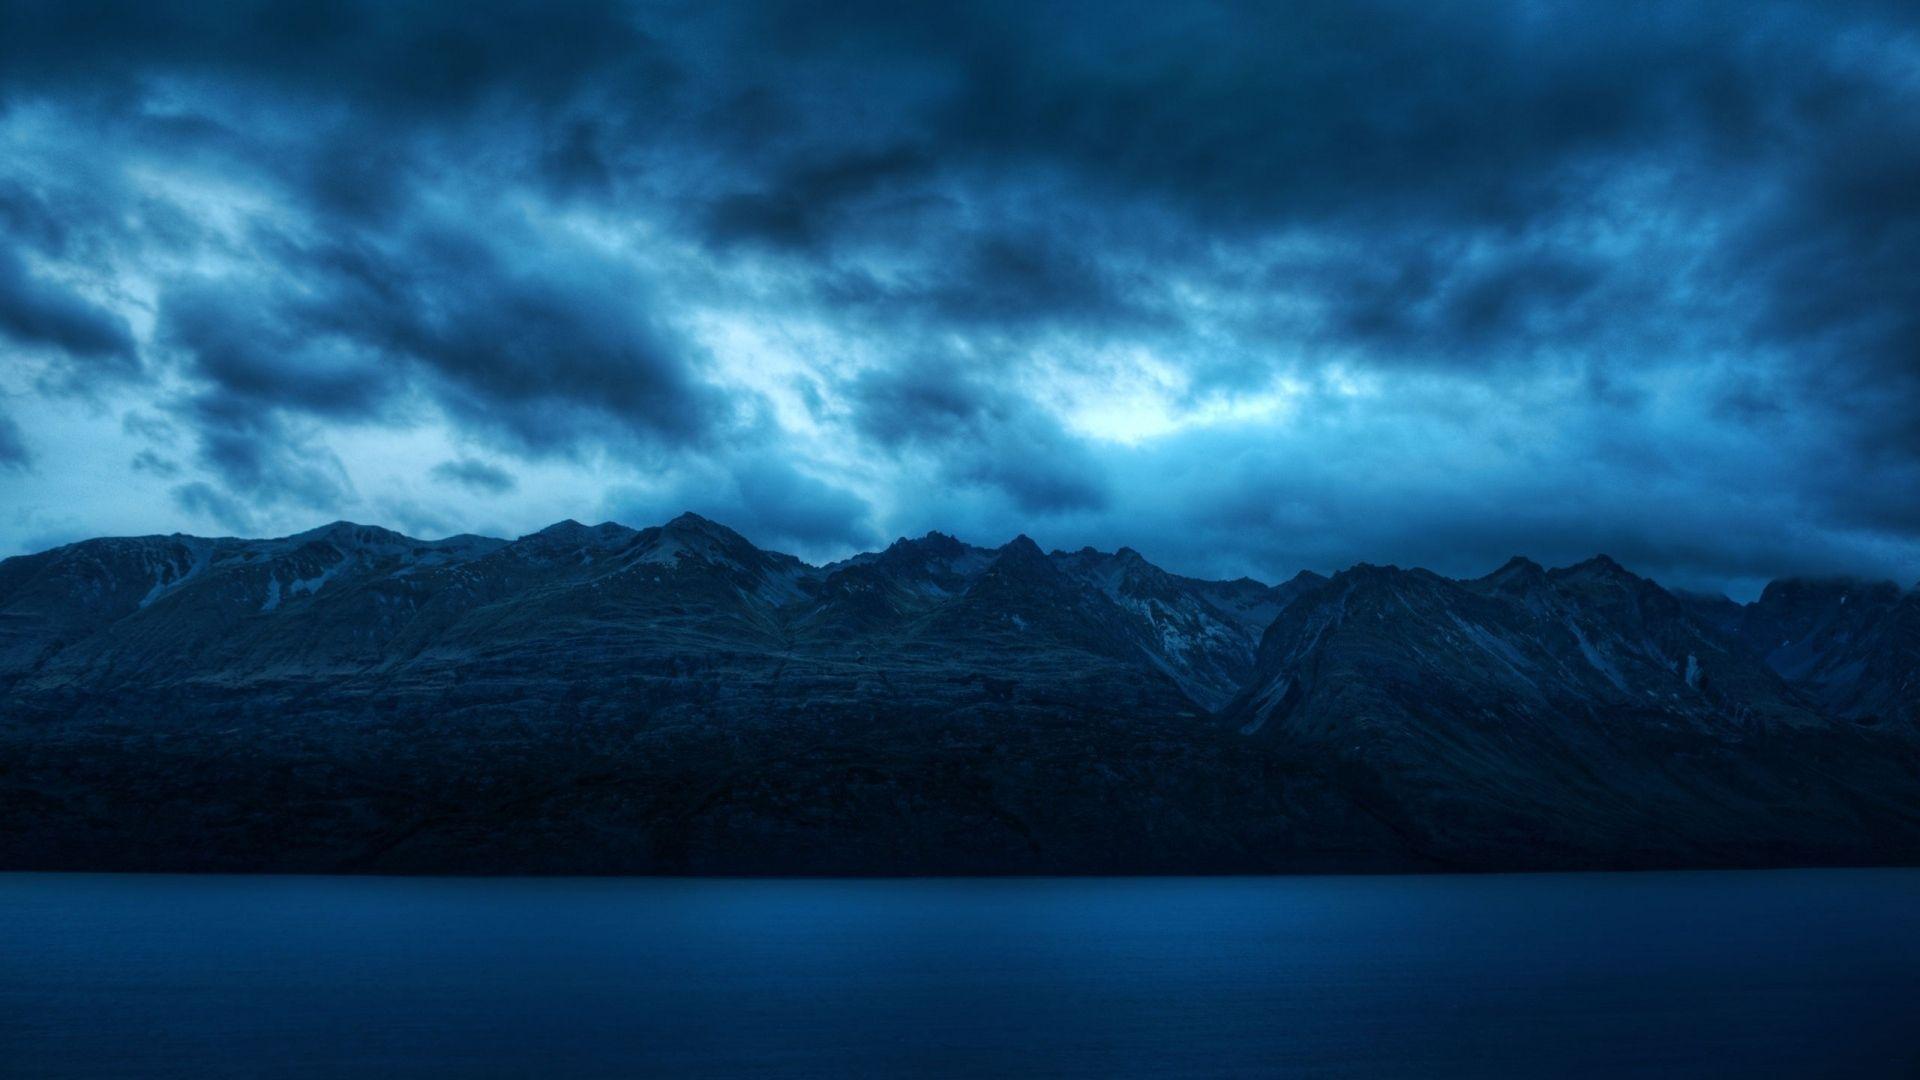 Download Wallpaper 1920x1080 water, blue, mountains, scenery